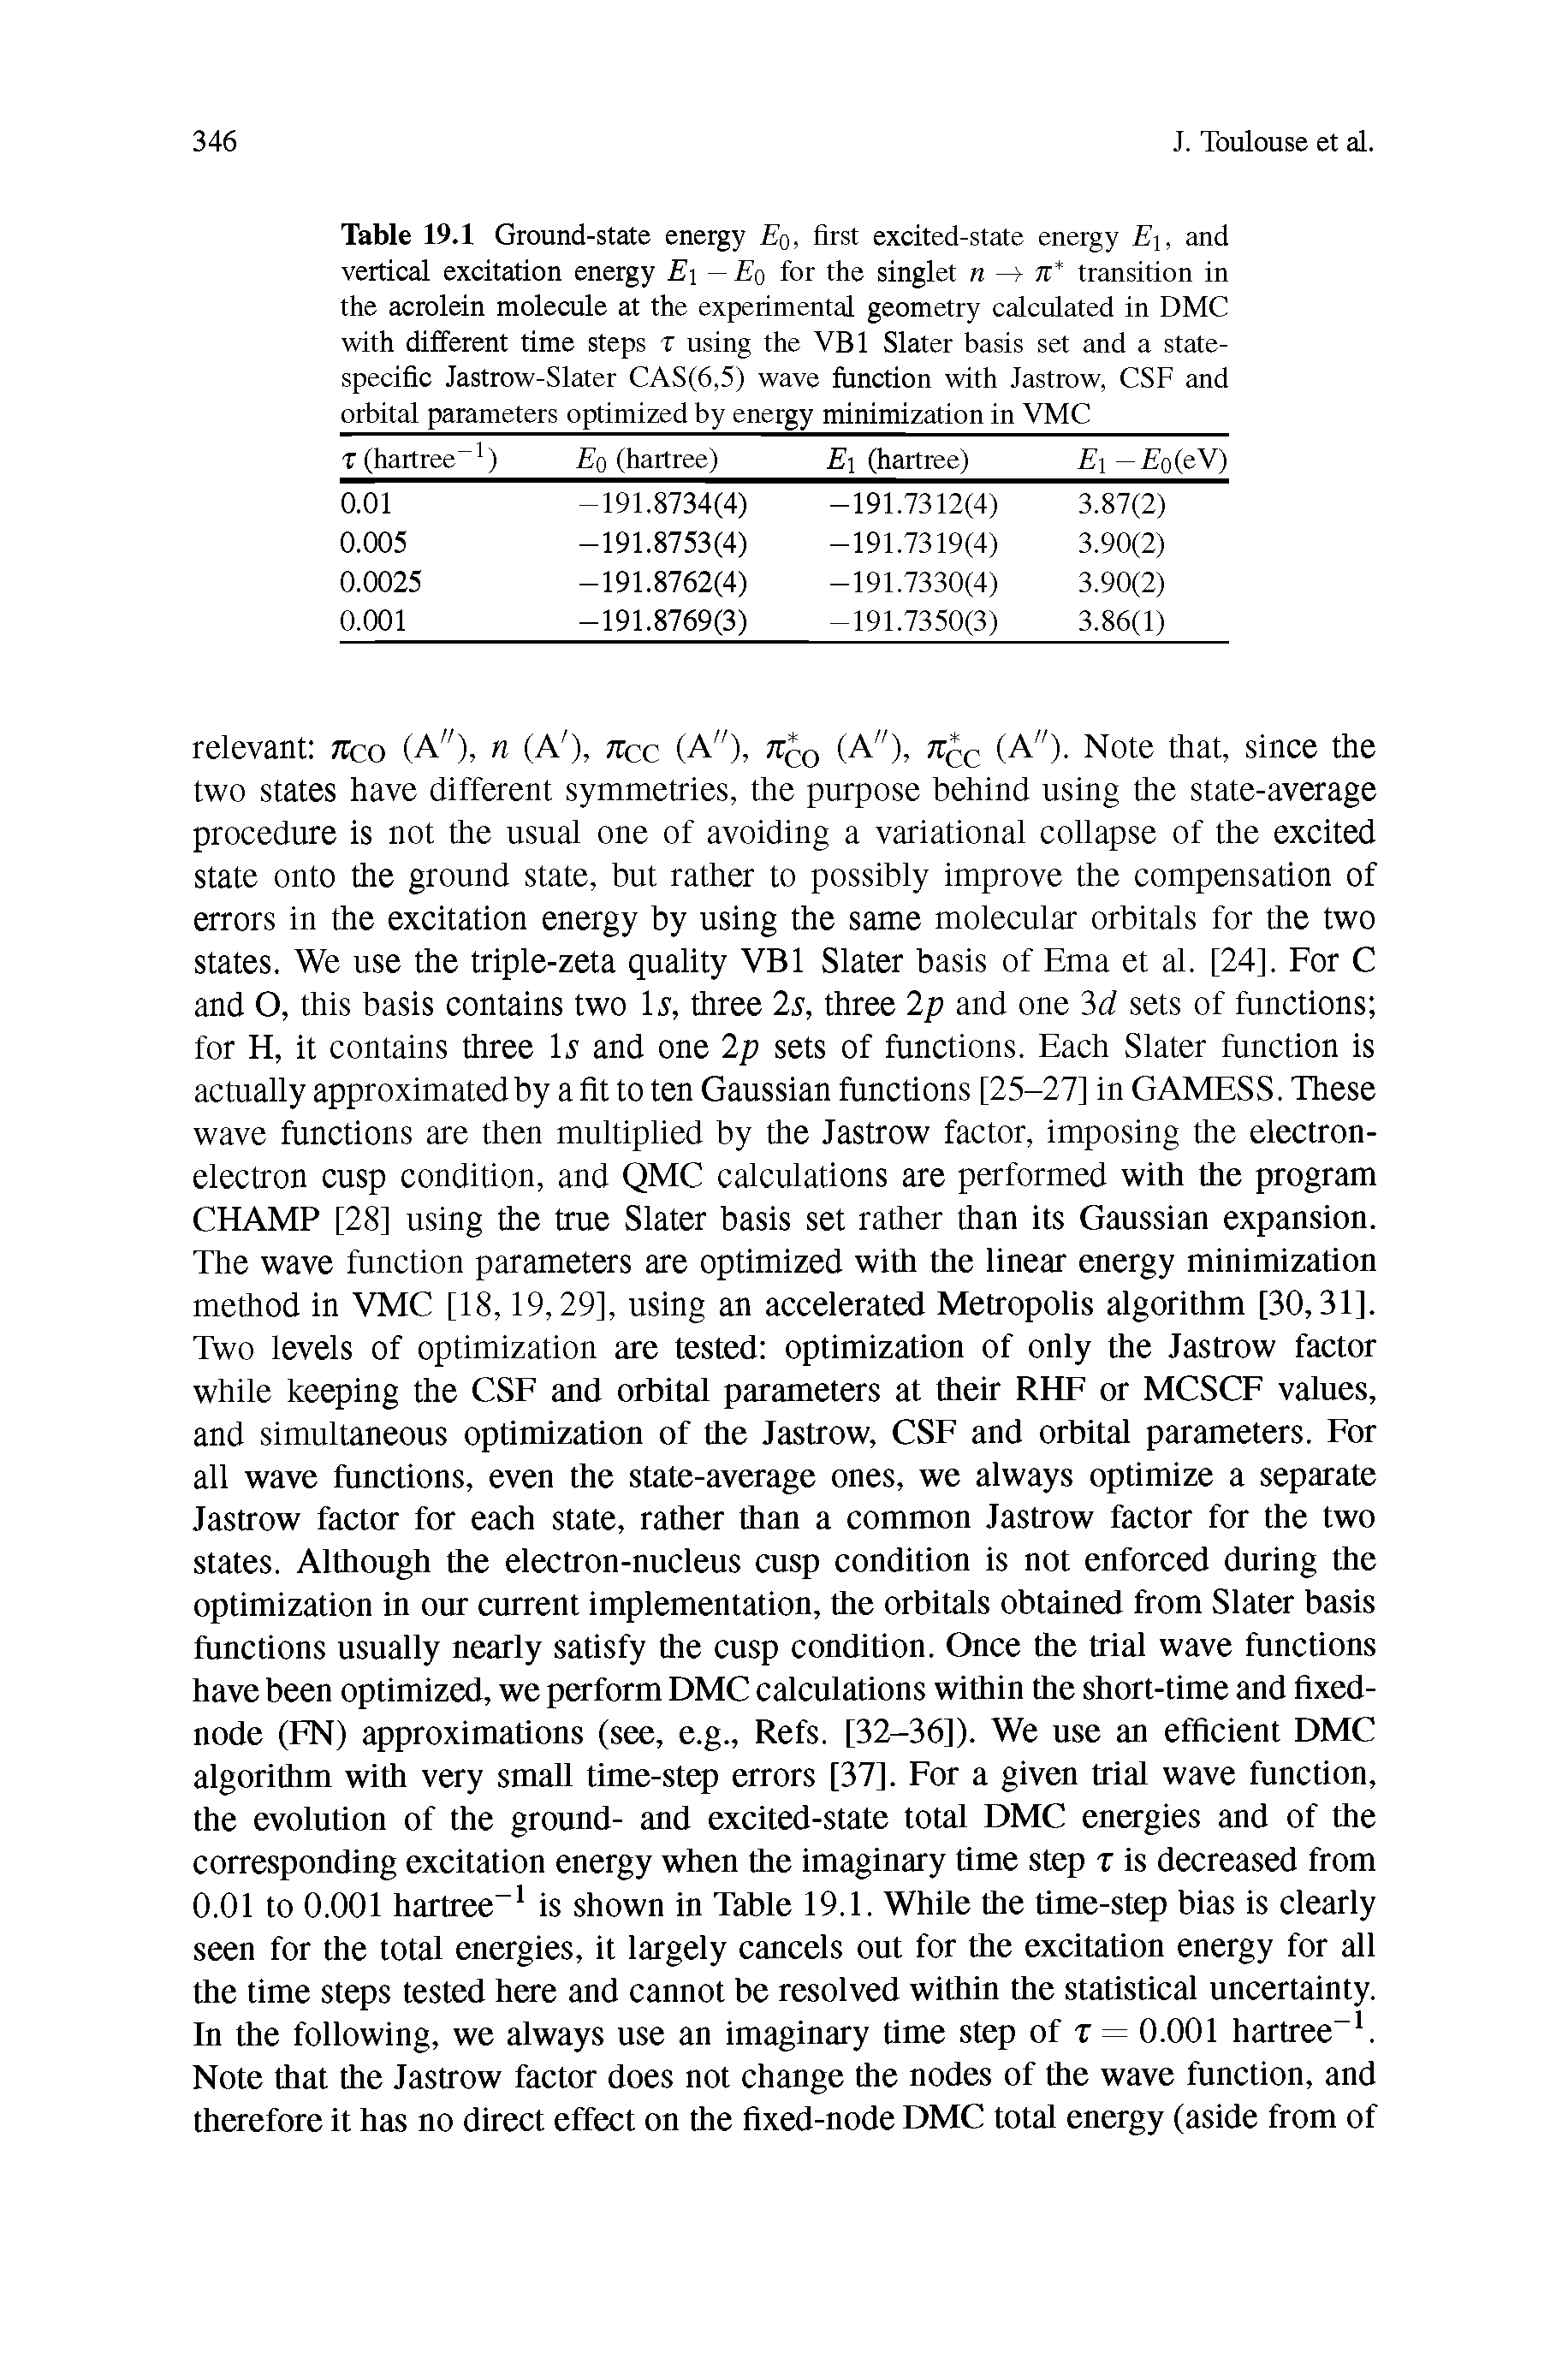 Table 19.1 Ground-state energy Eq, first excited-state energy E, and vertical excitation energy E — Eo for the singlet n —f n transition in the acrolein molecule at the experimental geometry calculated in DMC with different time steps % using the VBl Slater basis set and a state-specific Jastrow-Slater CAS(6,5) wave function with Jastrow, CSF and orbital parameters optimized by energy minimization in VMC...